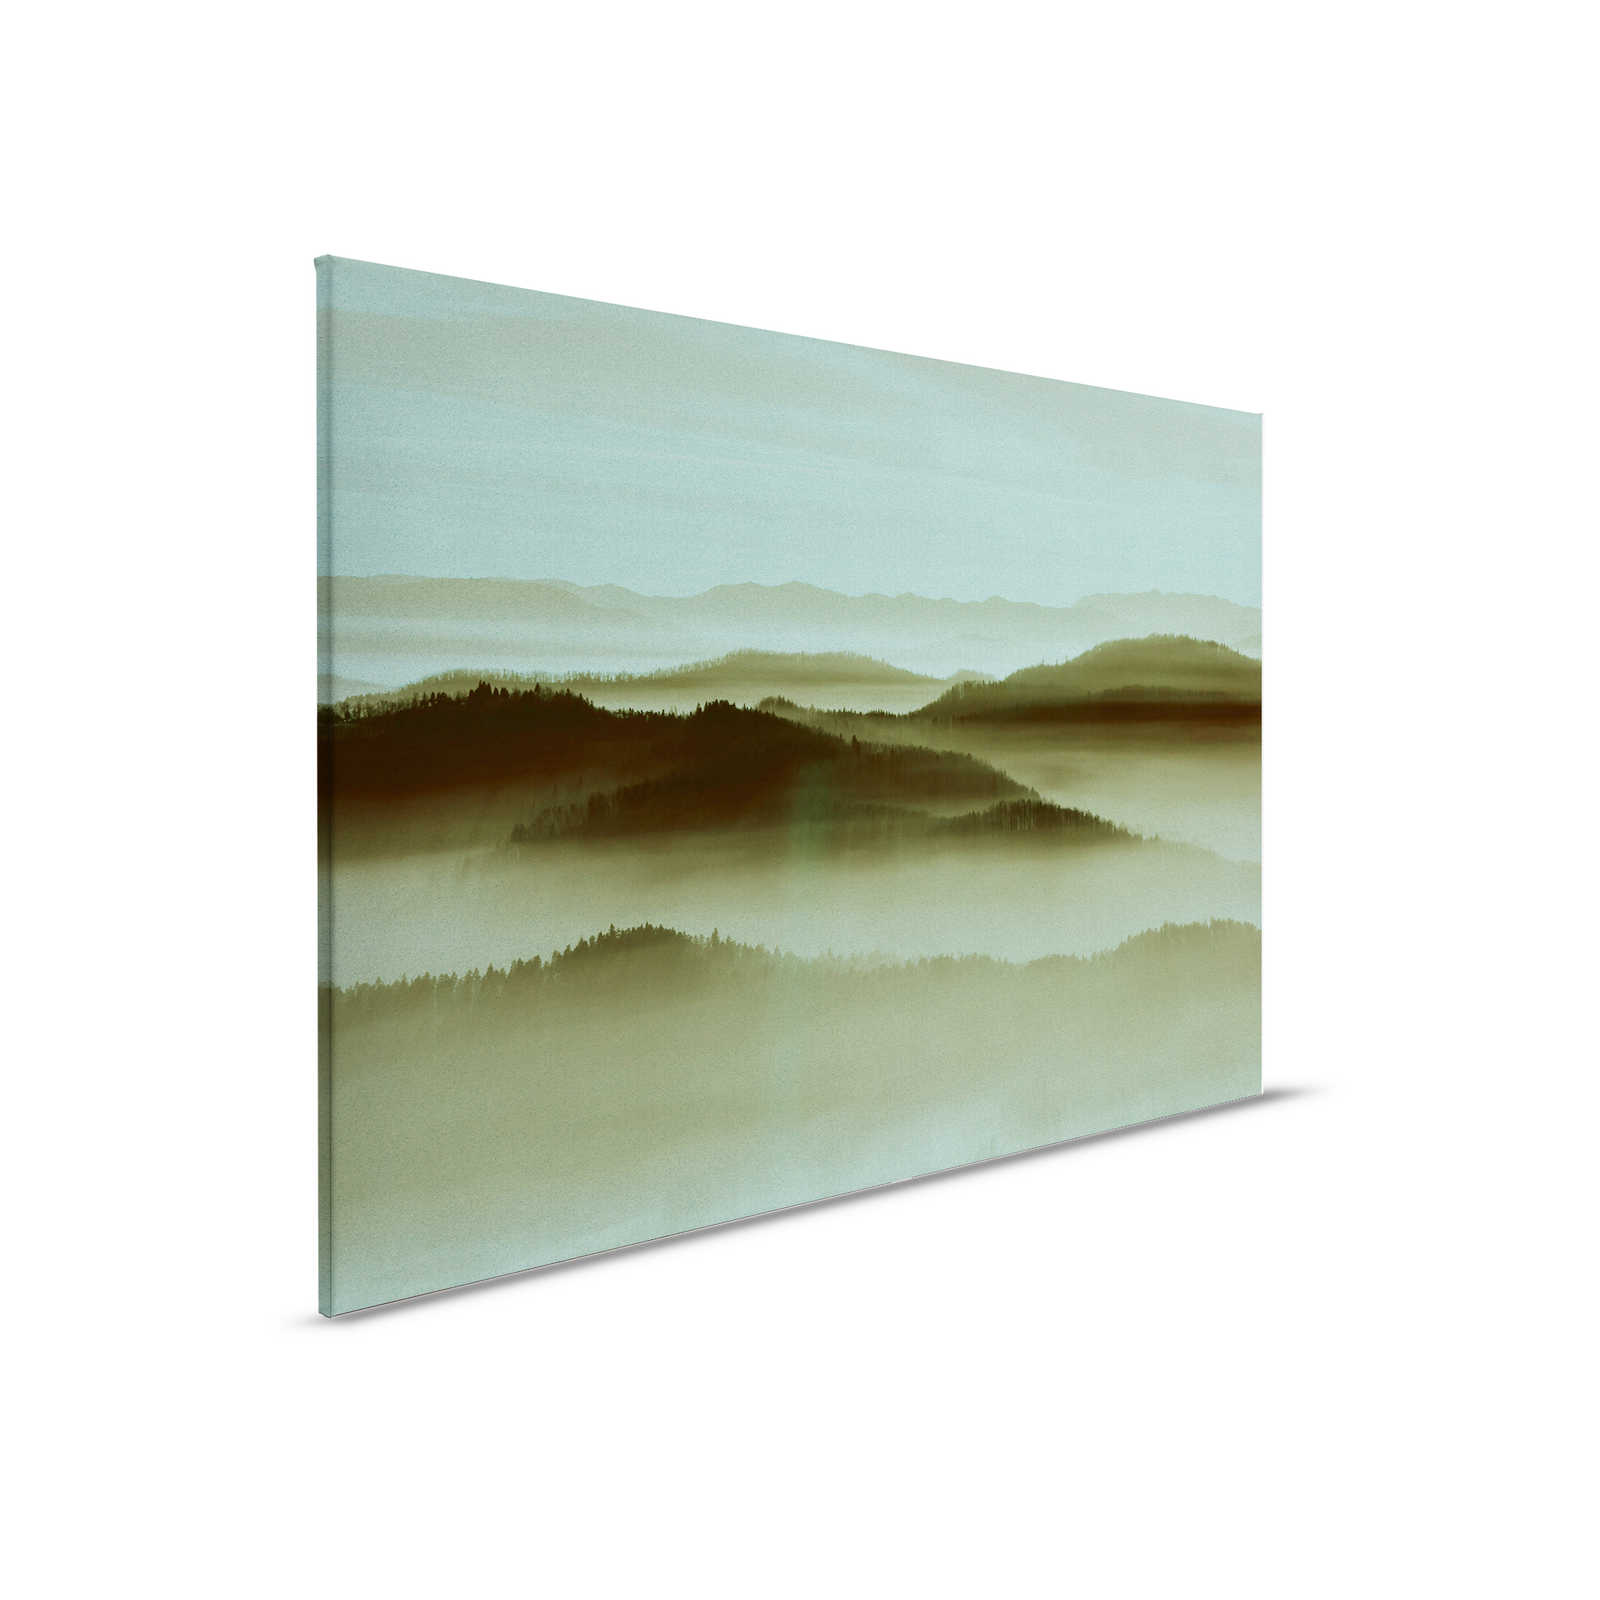         Horizon 2 - Canvas painting in cardboard structure with fog landscape, nature Sky Line - 0.90 m x 0.60 m
    